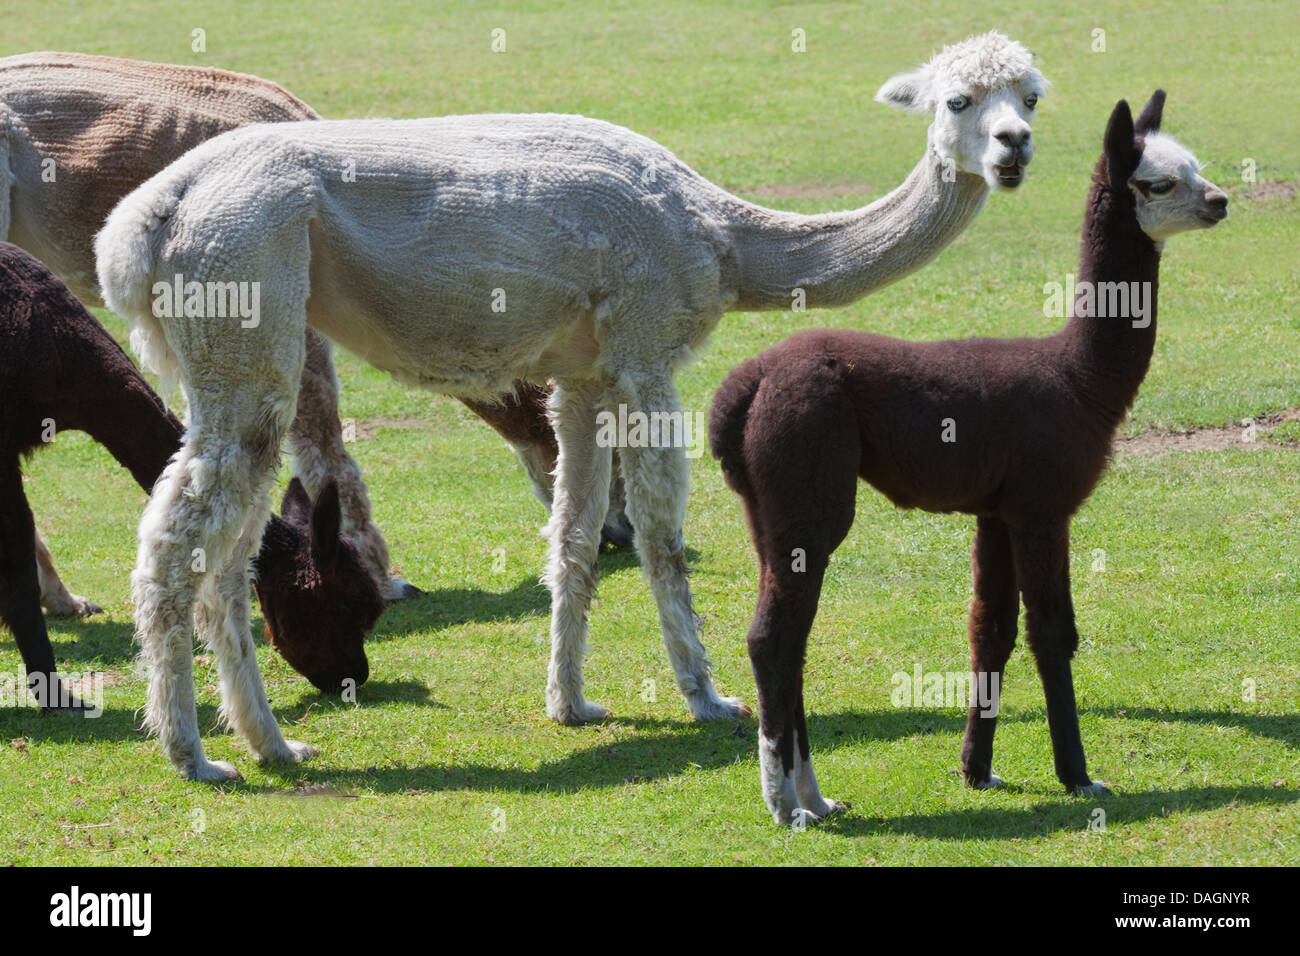 Alpaca (Vicugna pacos). Female after recent annual shearing, and young or cria. Stock Photo